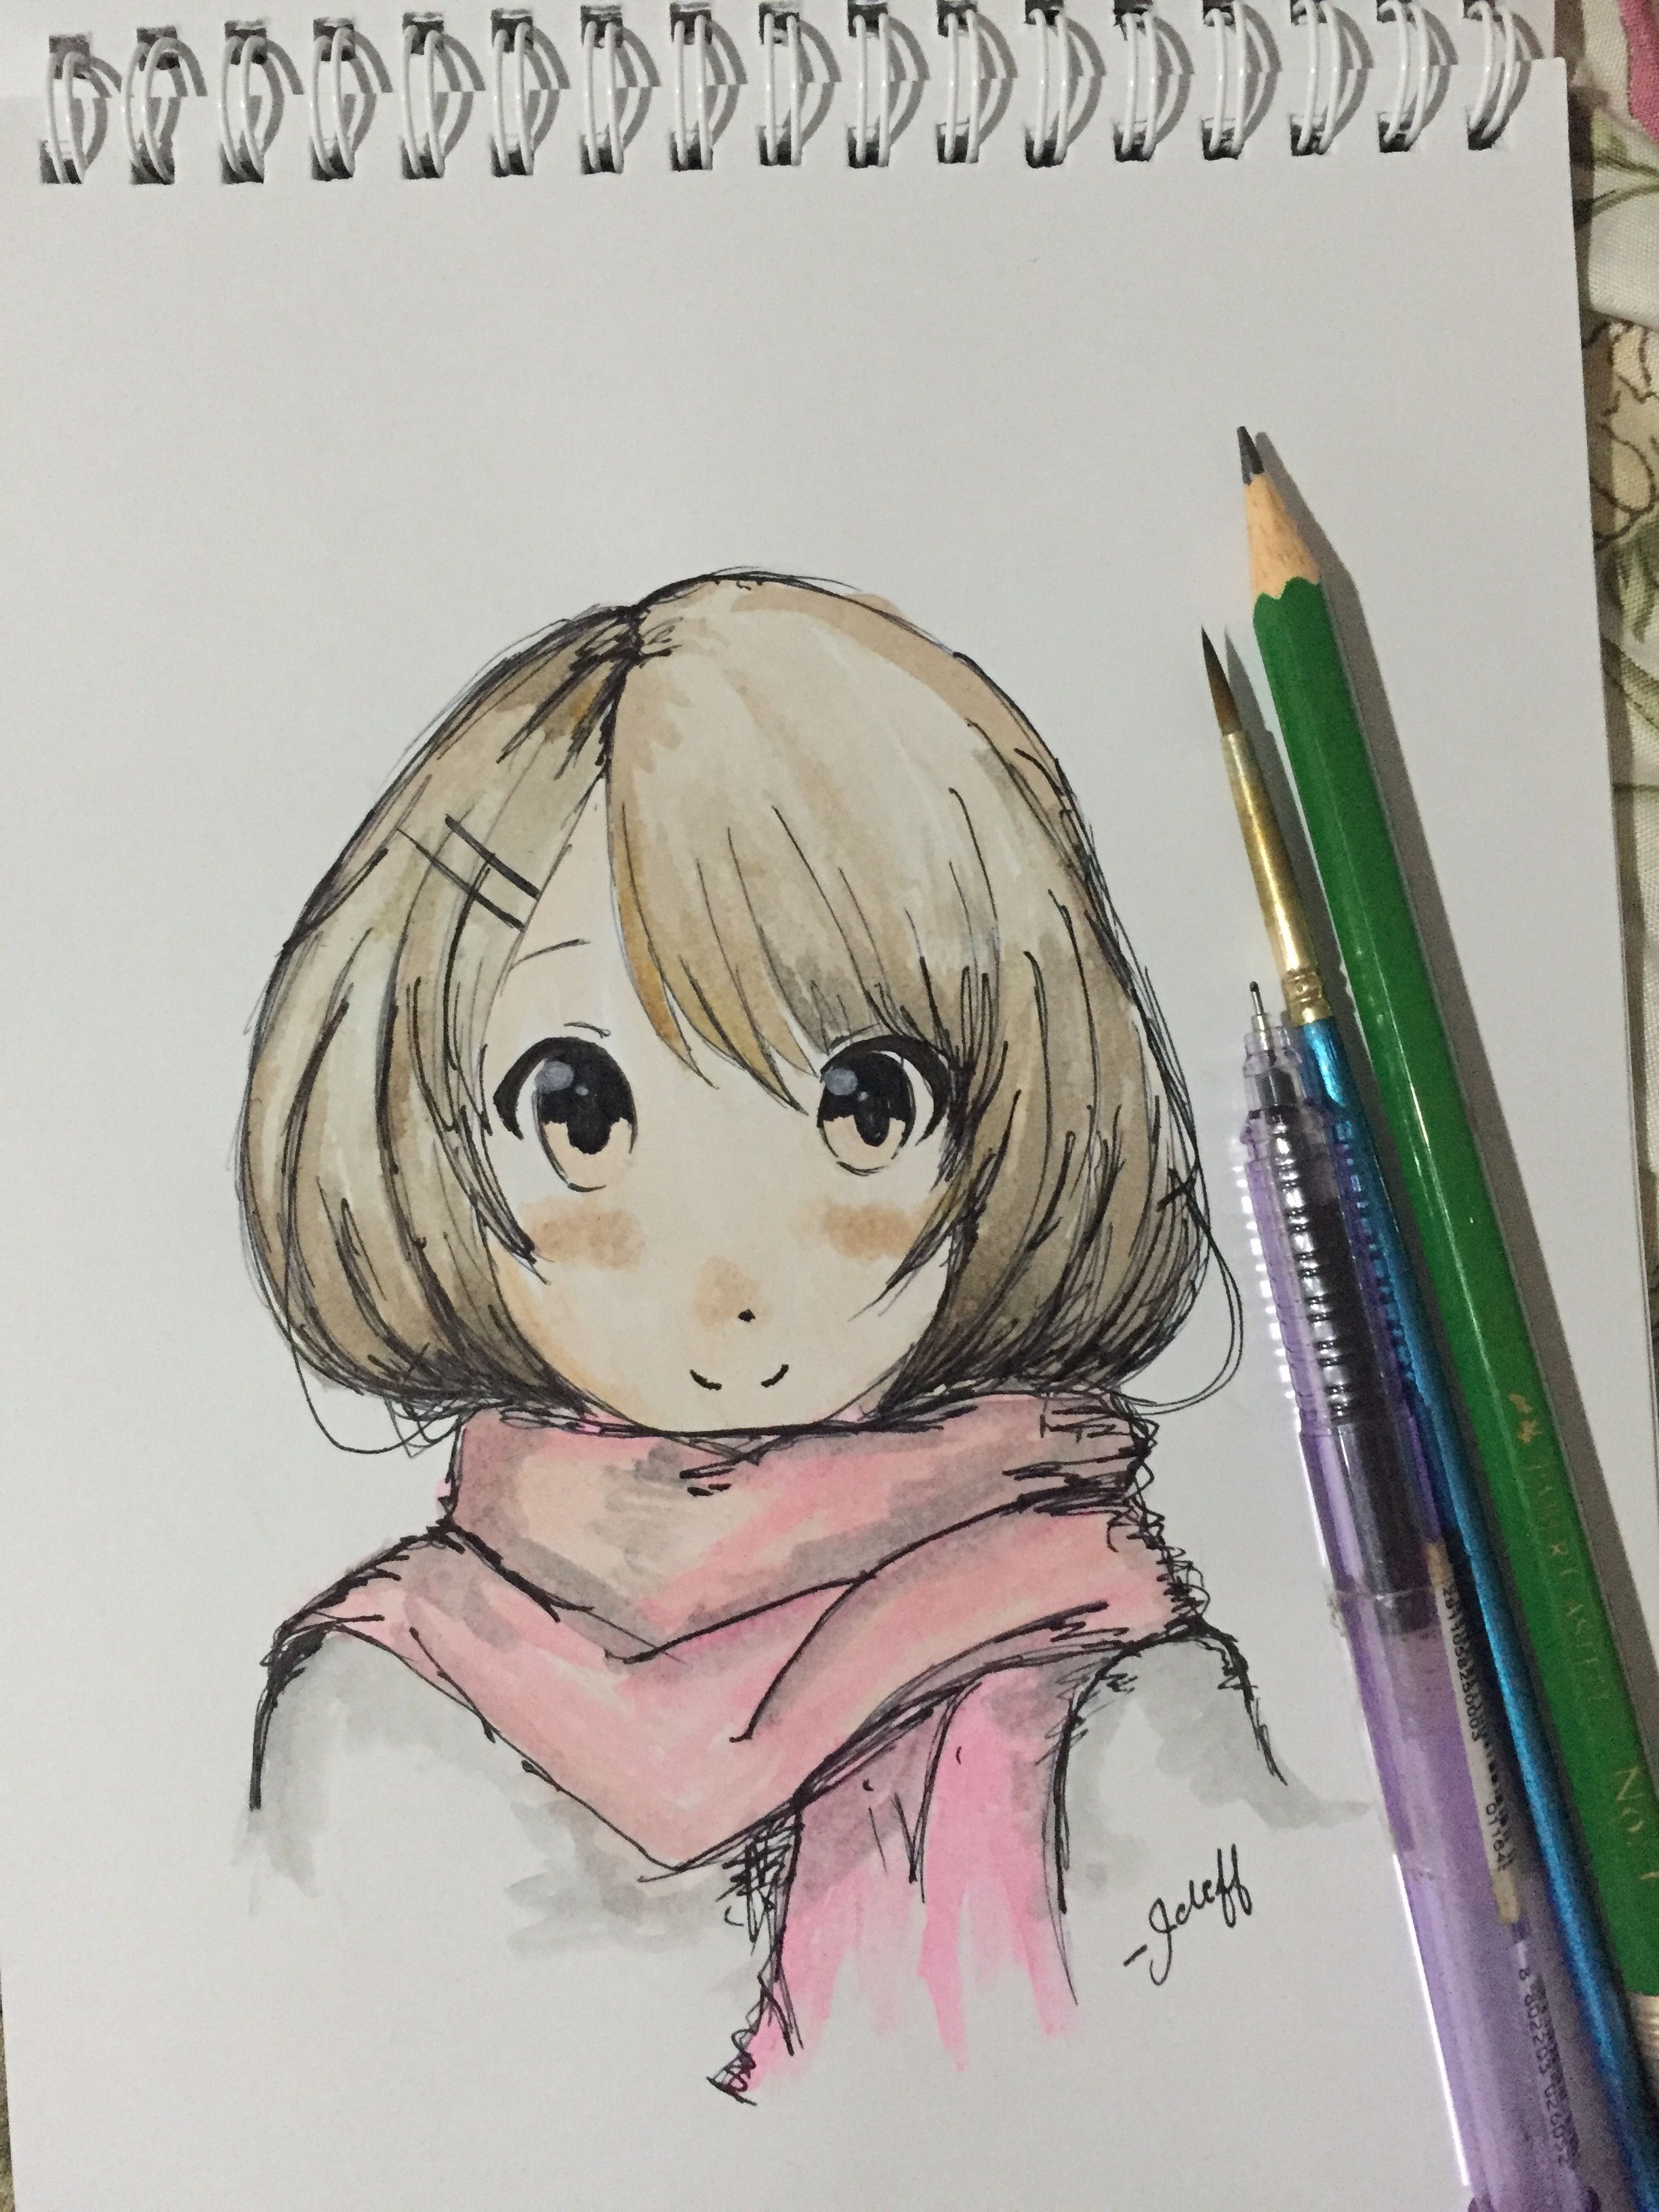 Easy Drawing for Beginners with Oil Pastels - Alone Anime Girl at Night -  Step by Step - MyHobbyClass.com - Learn Drawing, Painting and have fun with  Art and Craft